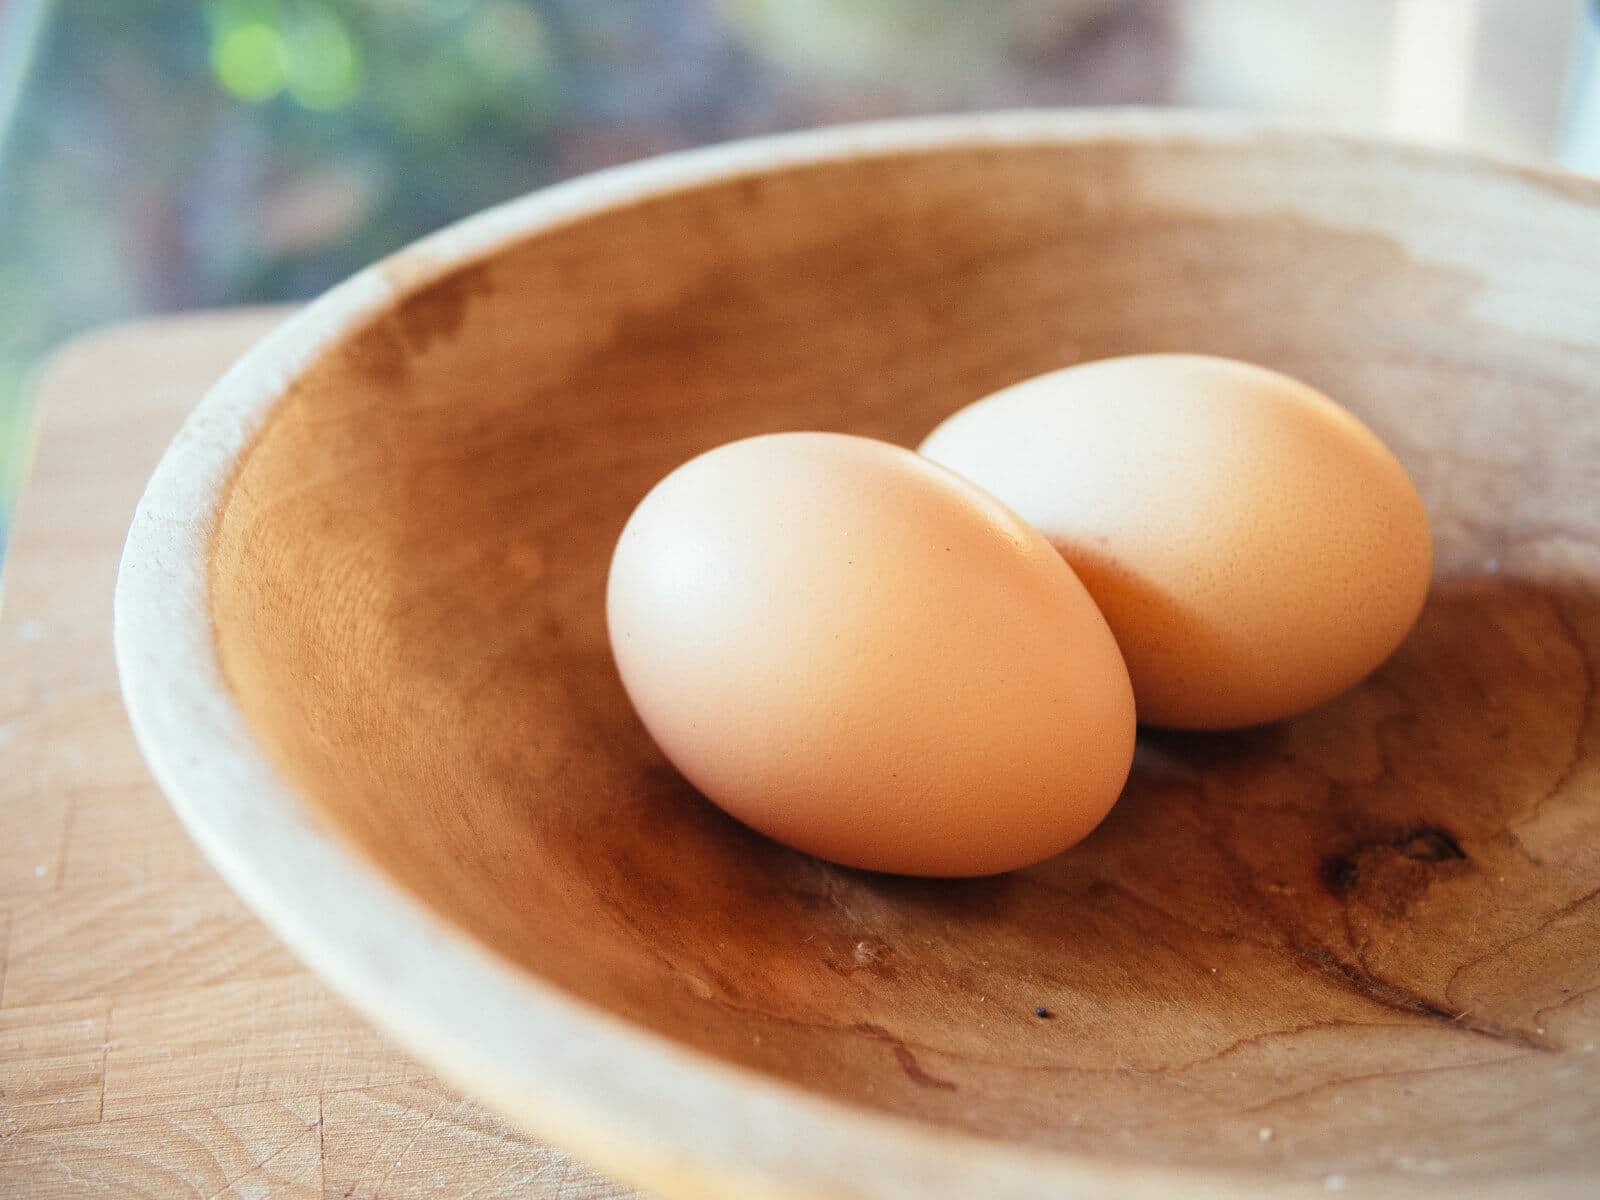 Freshly laid eggs can be stored safely at room temperature